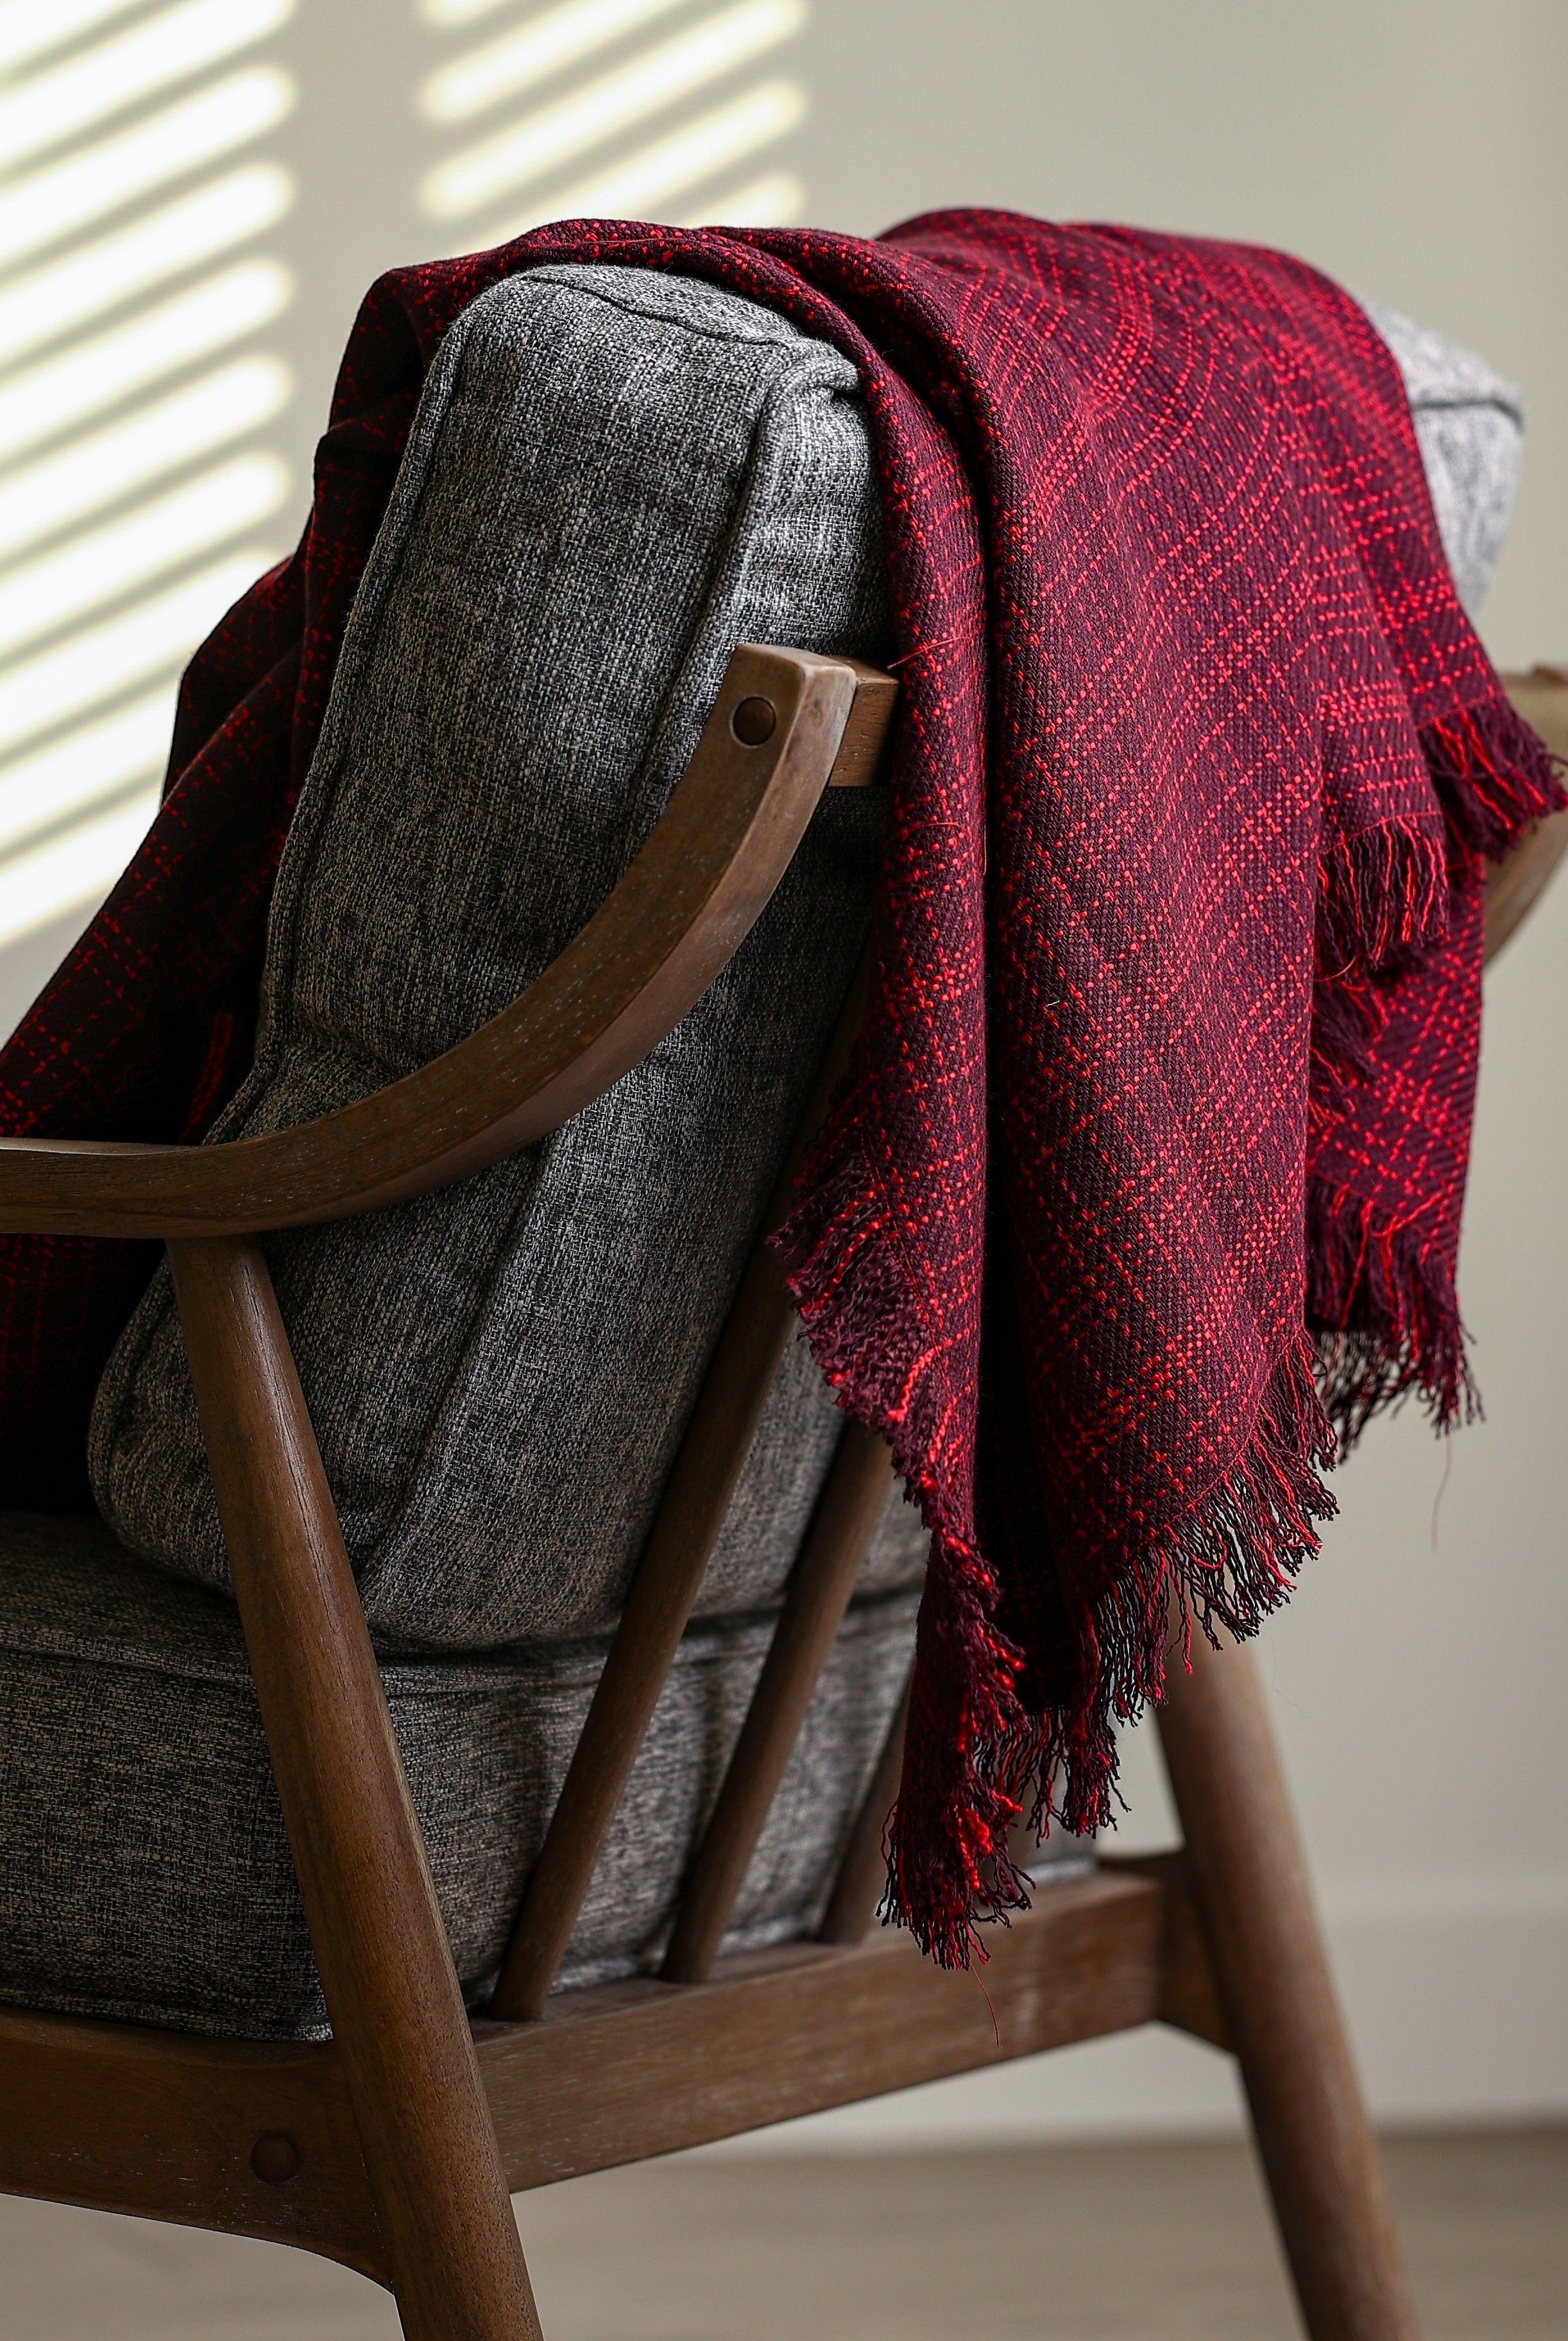 TWO TONED SUBLTE PLAID TWEED THROW BLANKET - Boucle Home